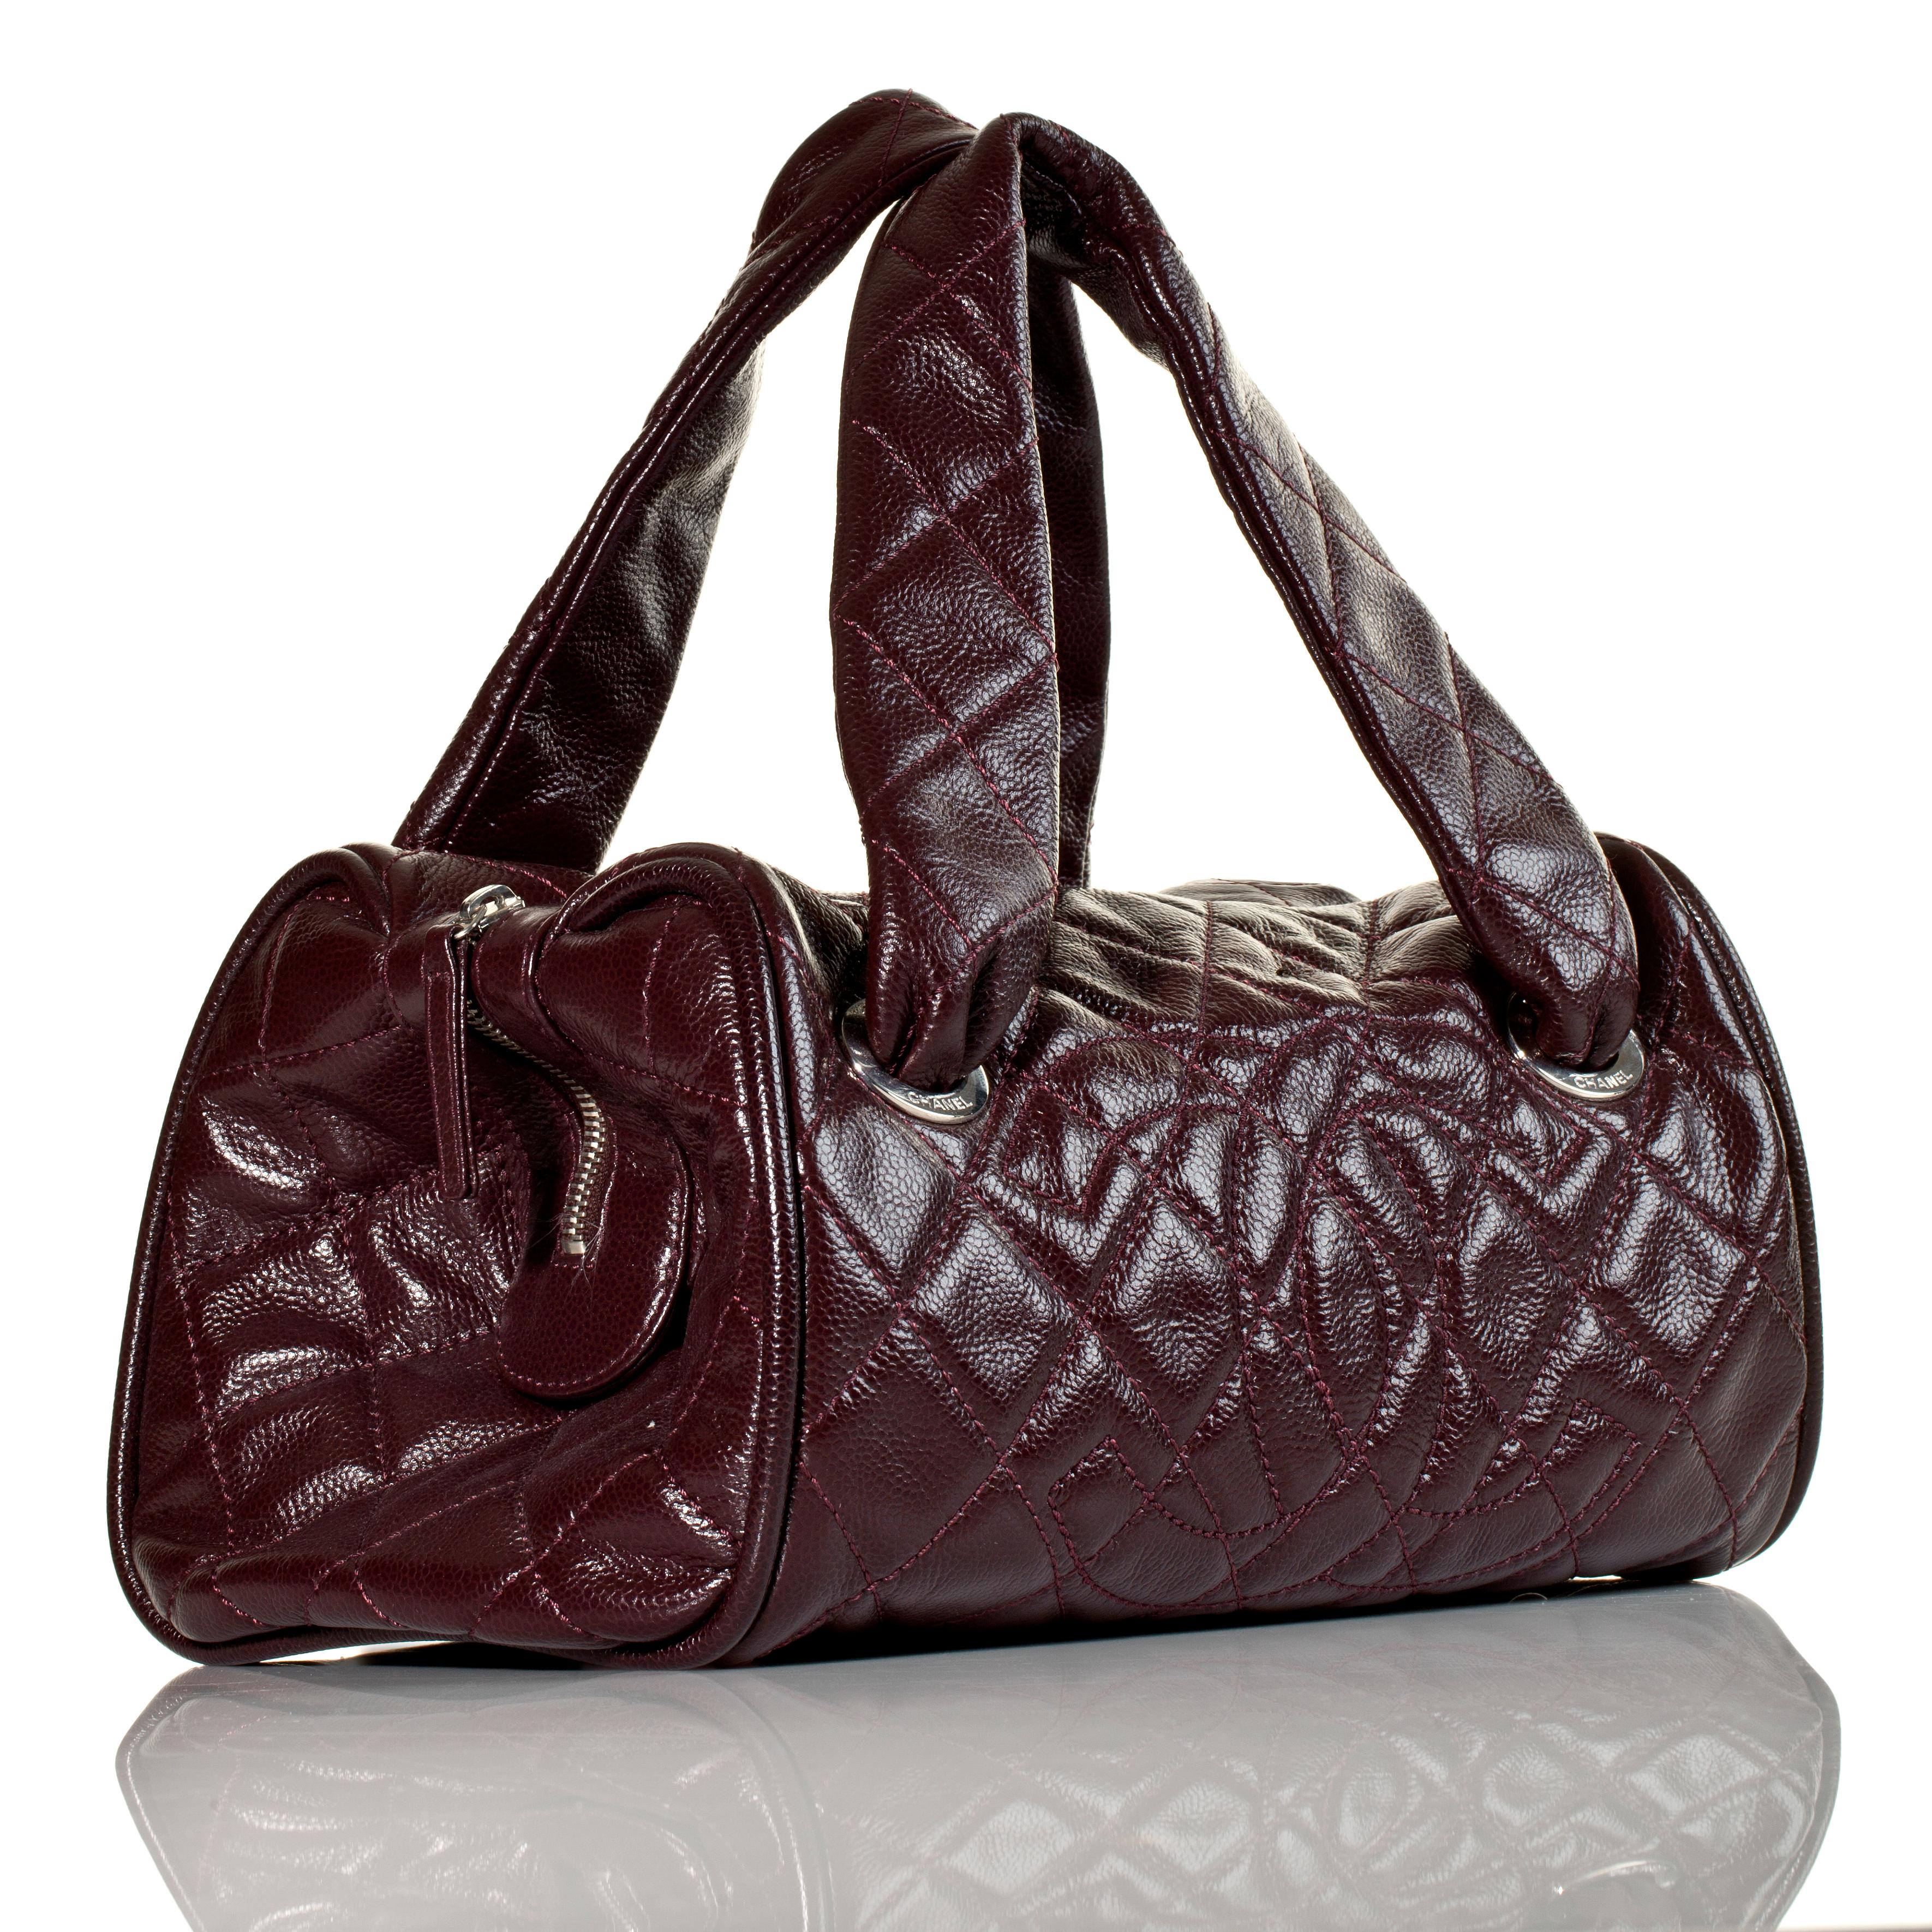 Chanel 2006 Quilted Caviar Burgundy CC Kelly Top Handle Boston Satchel Tote Bag 

Year: 2006 {Vintage 18 Year}

Silver hardware
Stitched CC Logo at front 
Dual top handles
Zip closure at top
Burgundy leather lining 
Three interior pockets
Protective